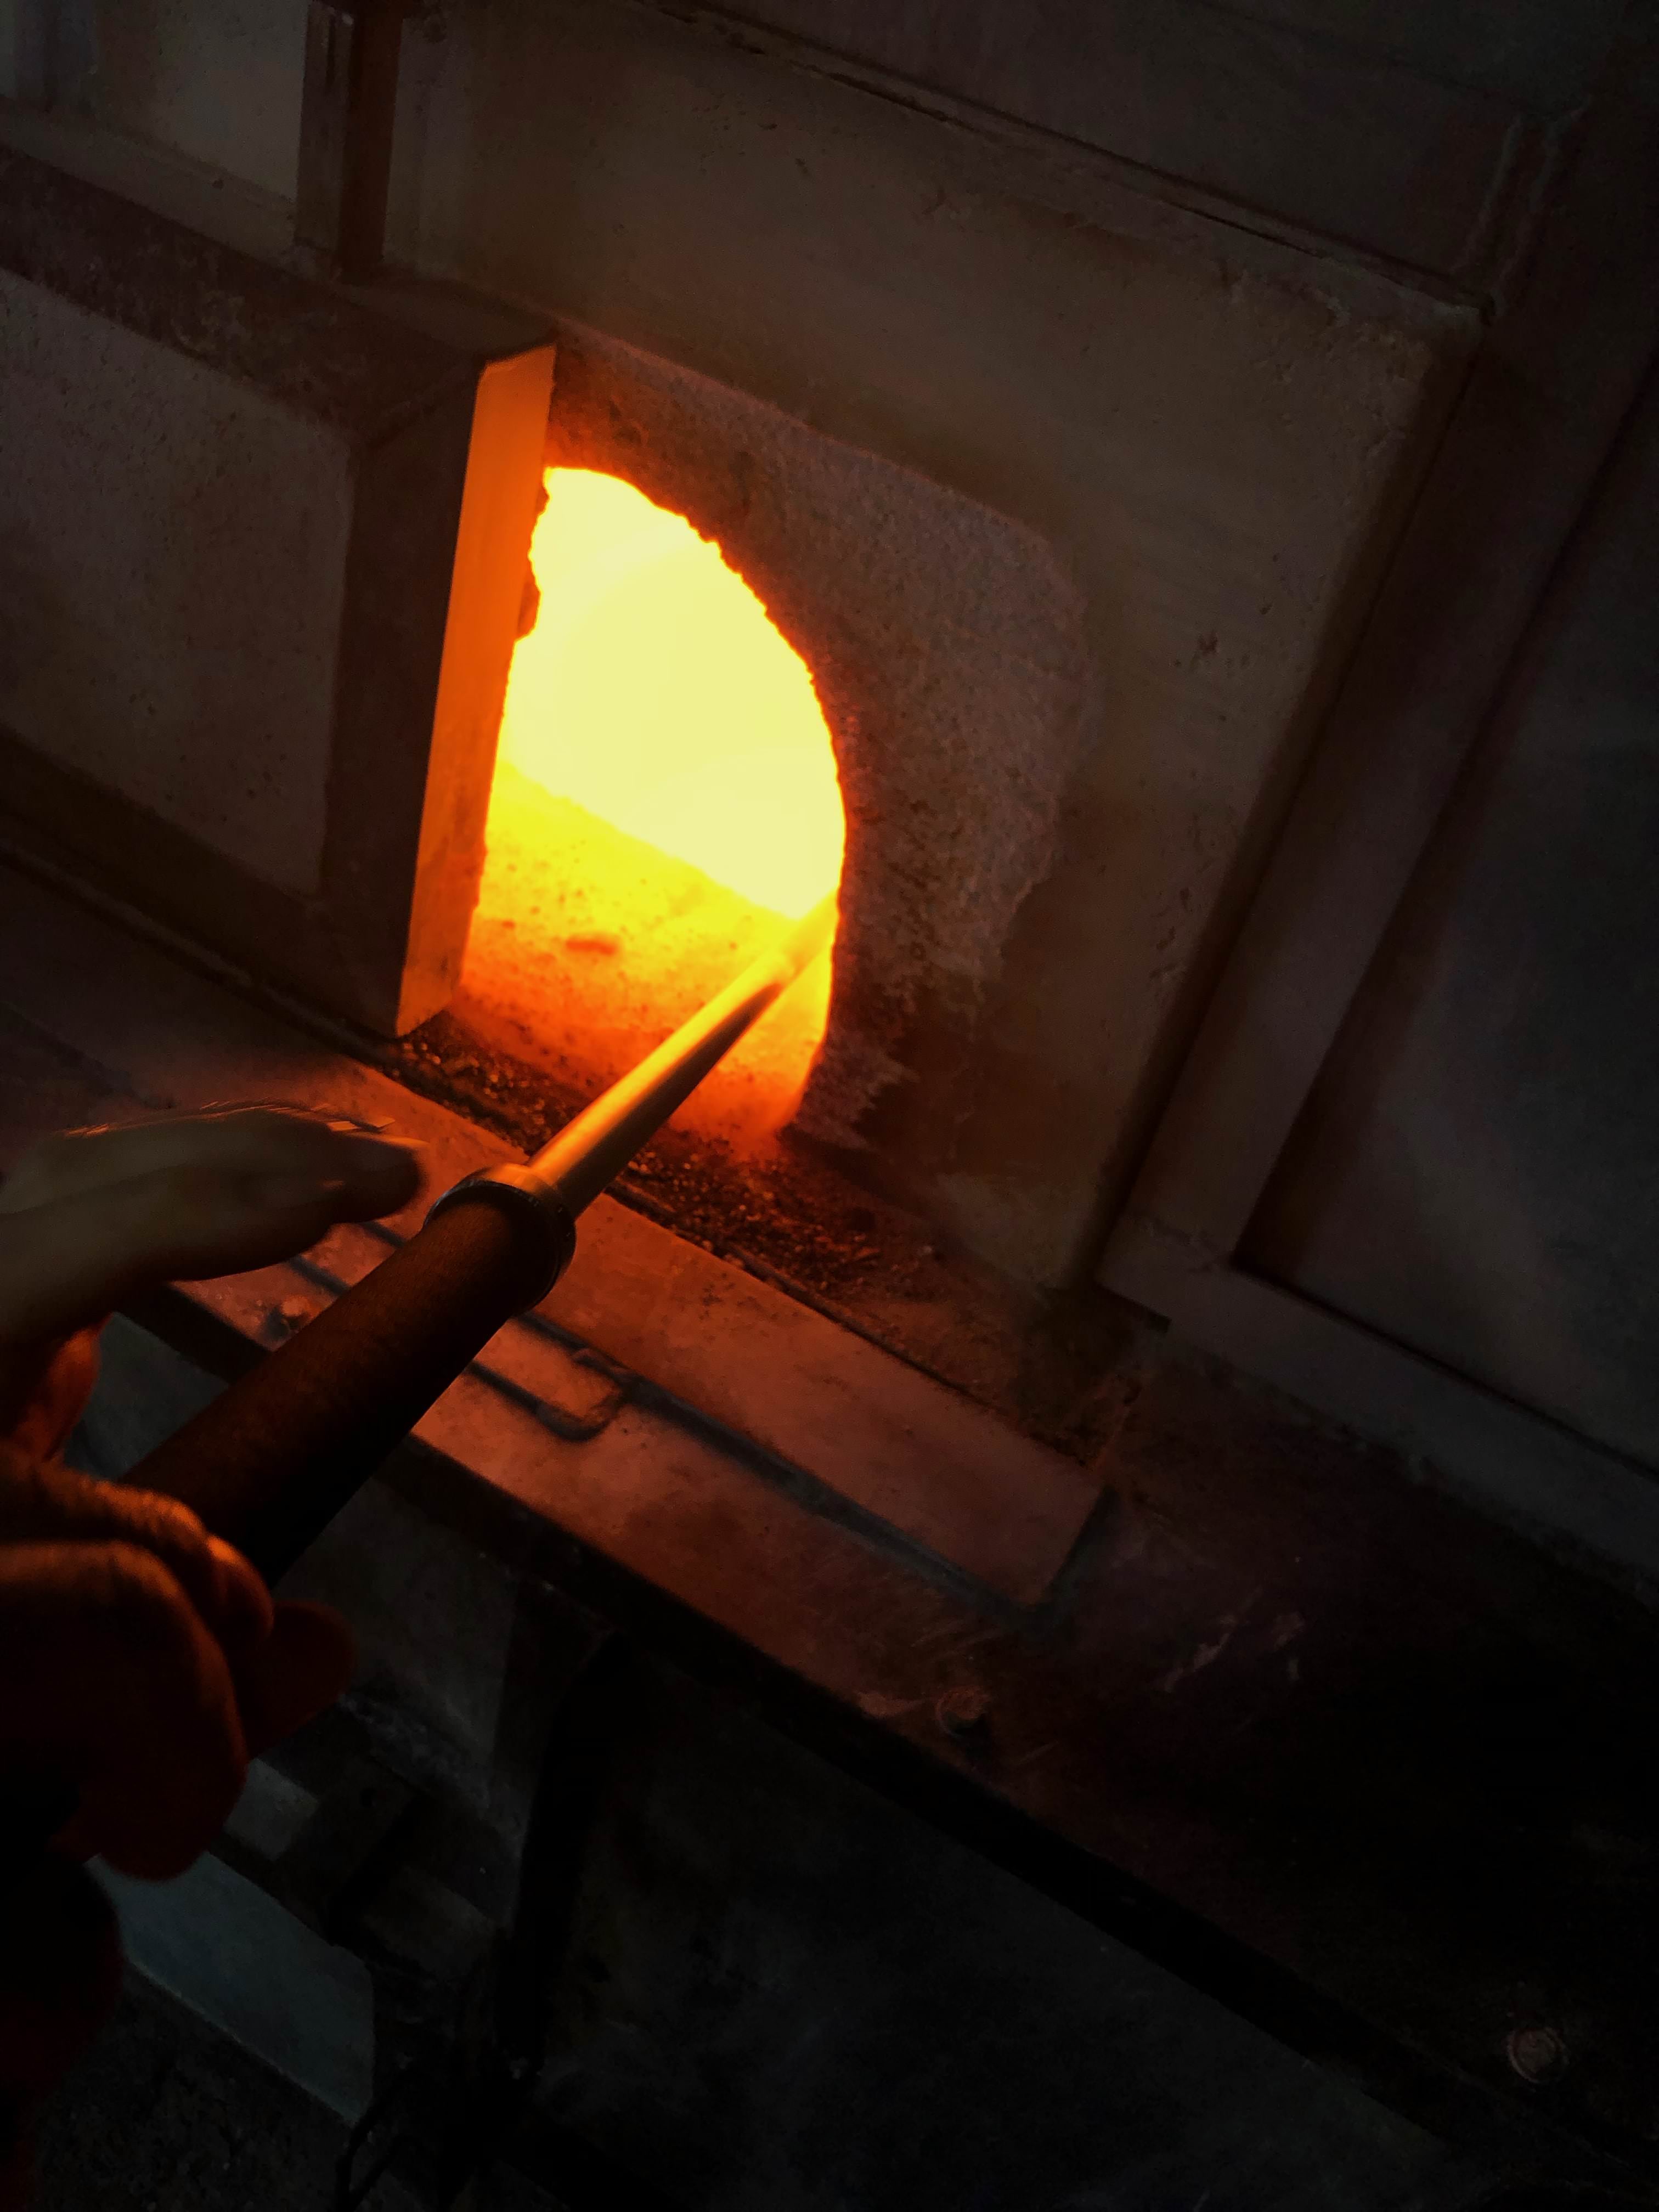 Retrieving molten glass from a glowing hot oven at Flame Run